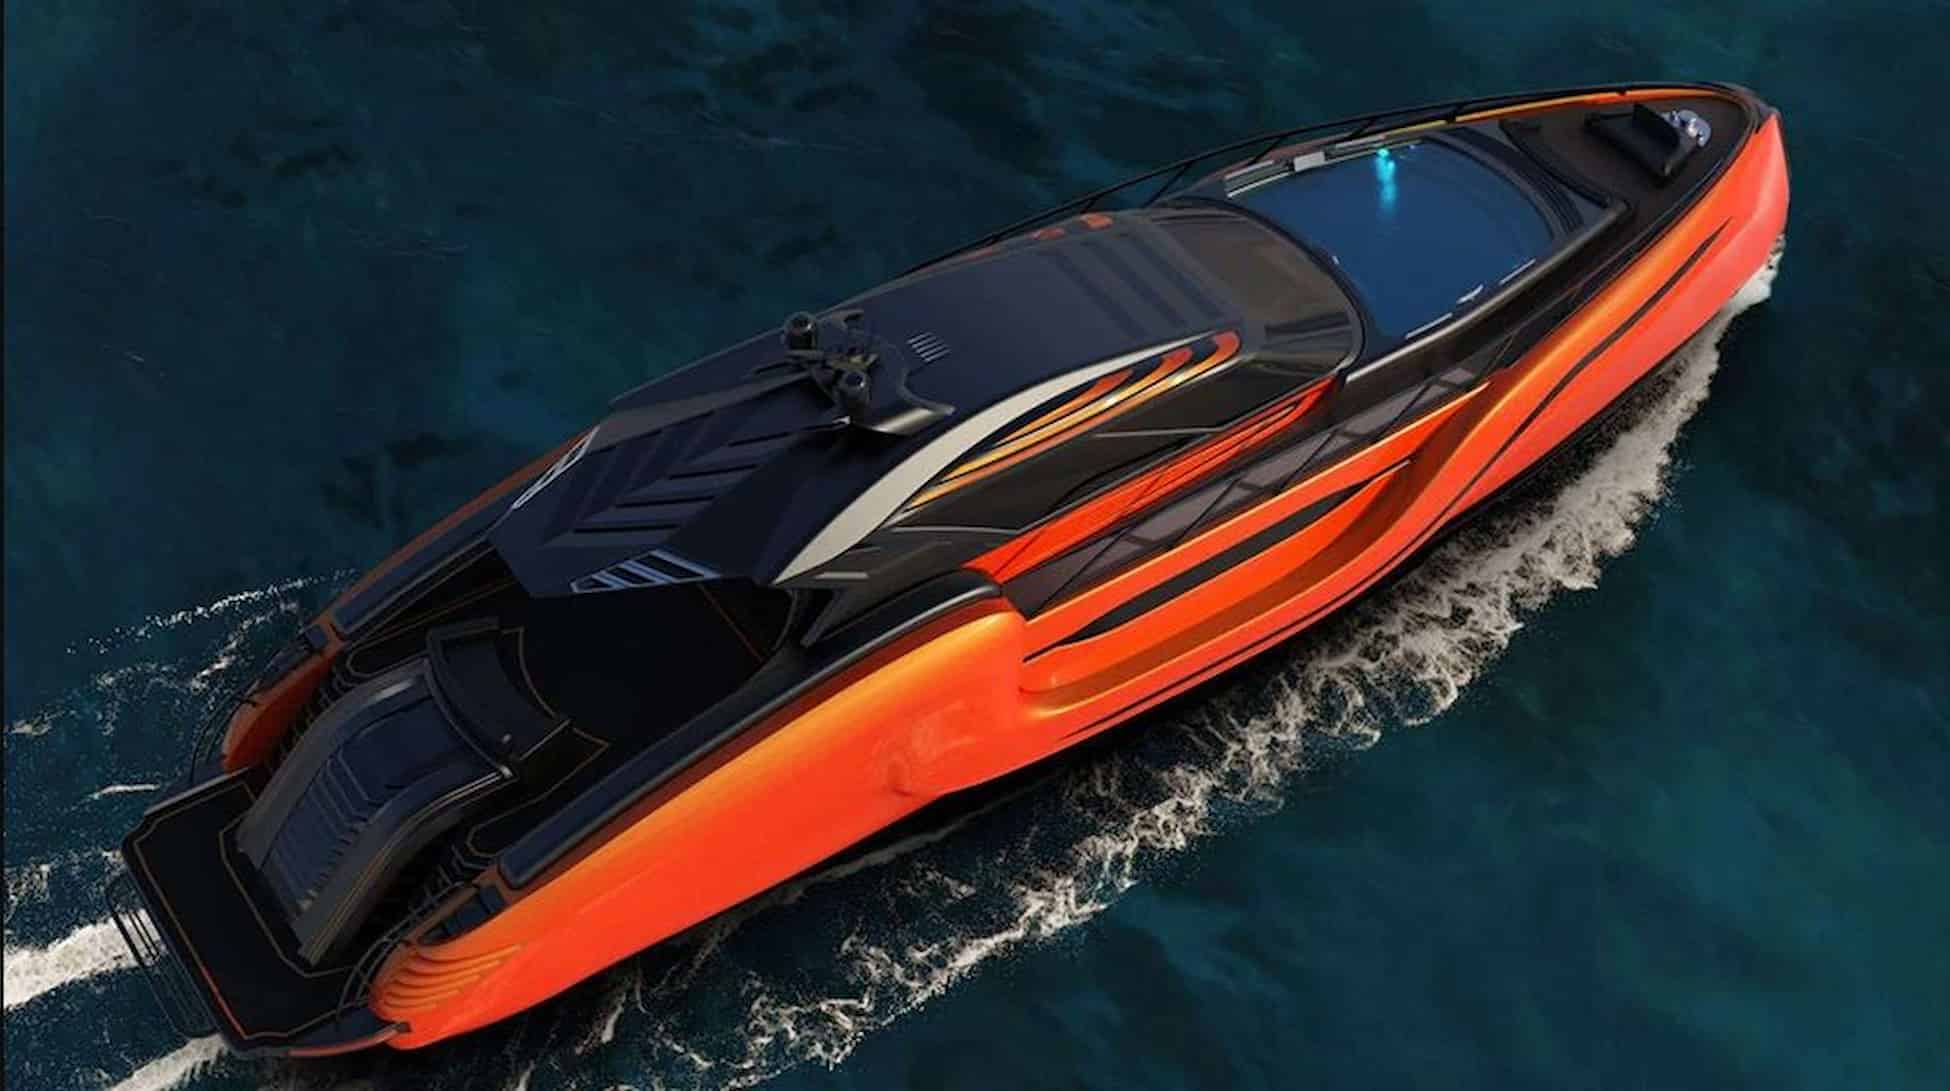 naval yachts unveils the lxt88 superyacht a striking supercar inspired speed demon 7